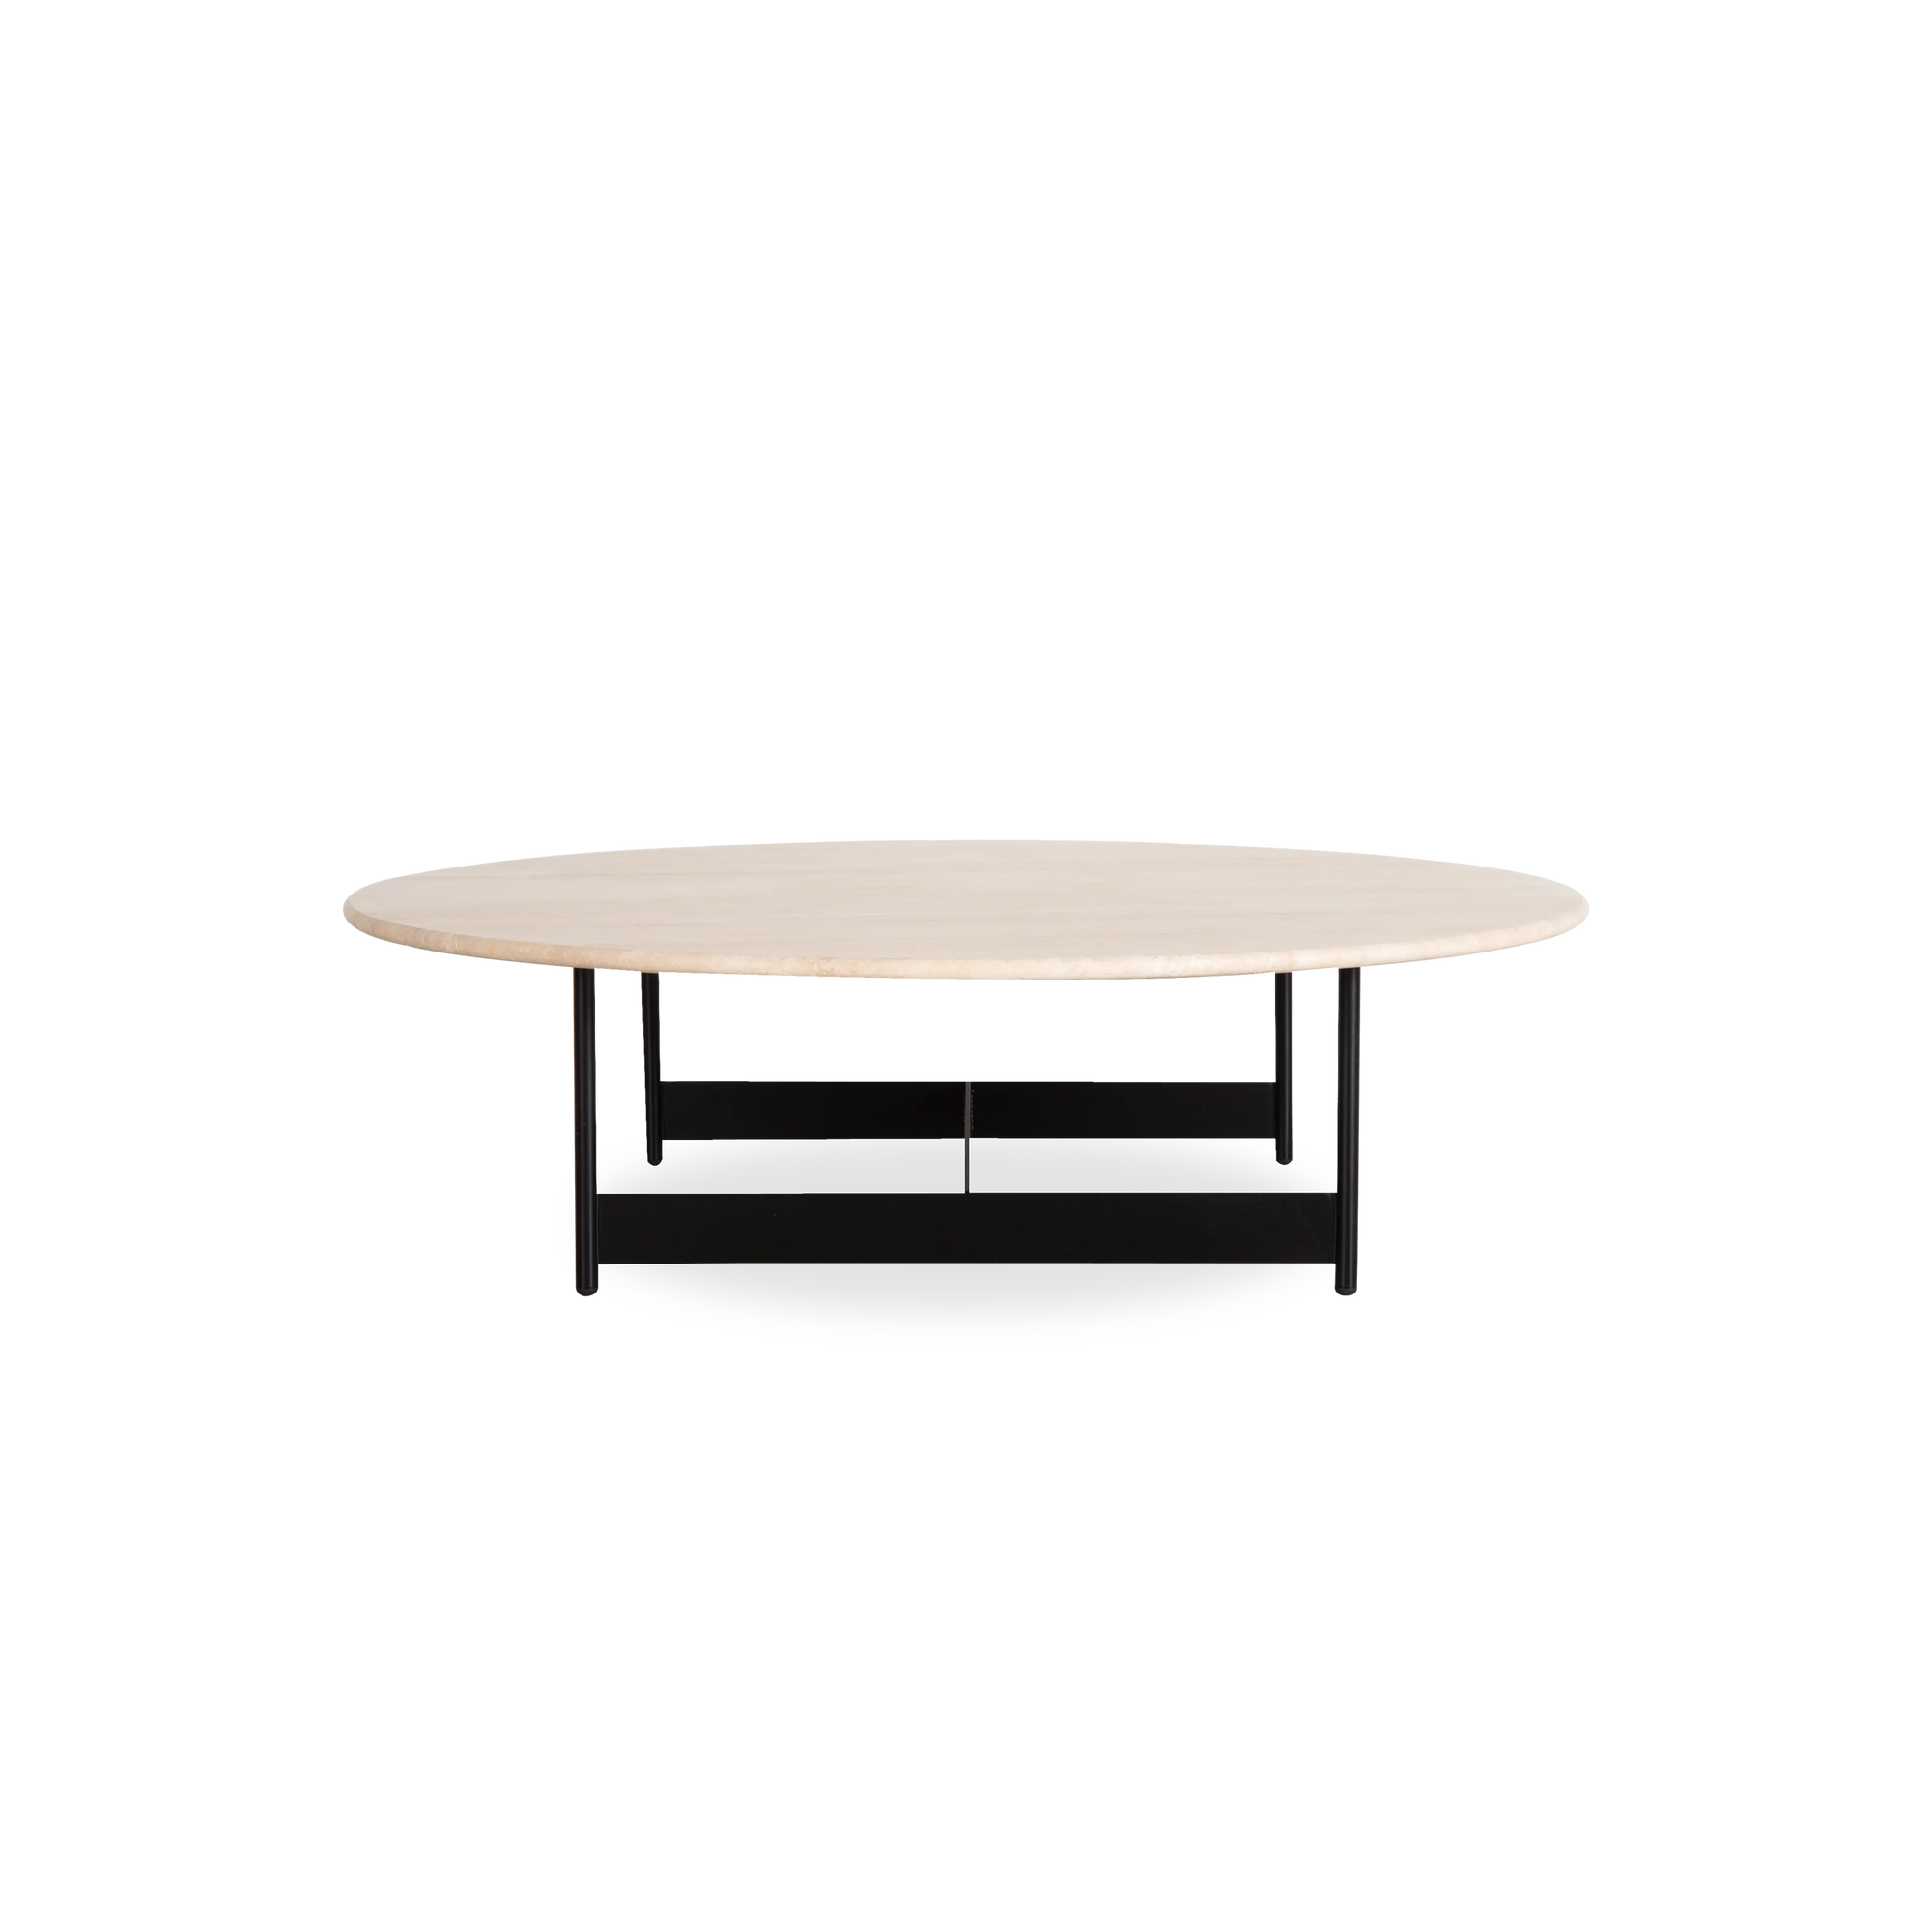 Claesson Koivisto Rune's Tokio Coffee Table seamlessly merges refined aesthetics with functional ingenuity, creating a harmonious interplay of geometric shapes and showcasing a bal